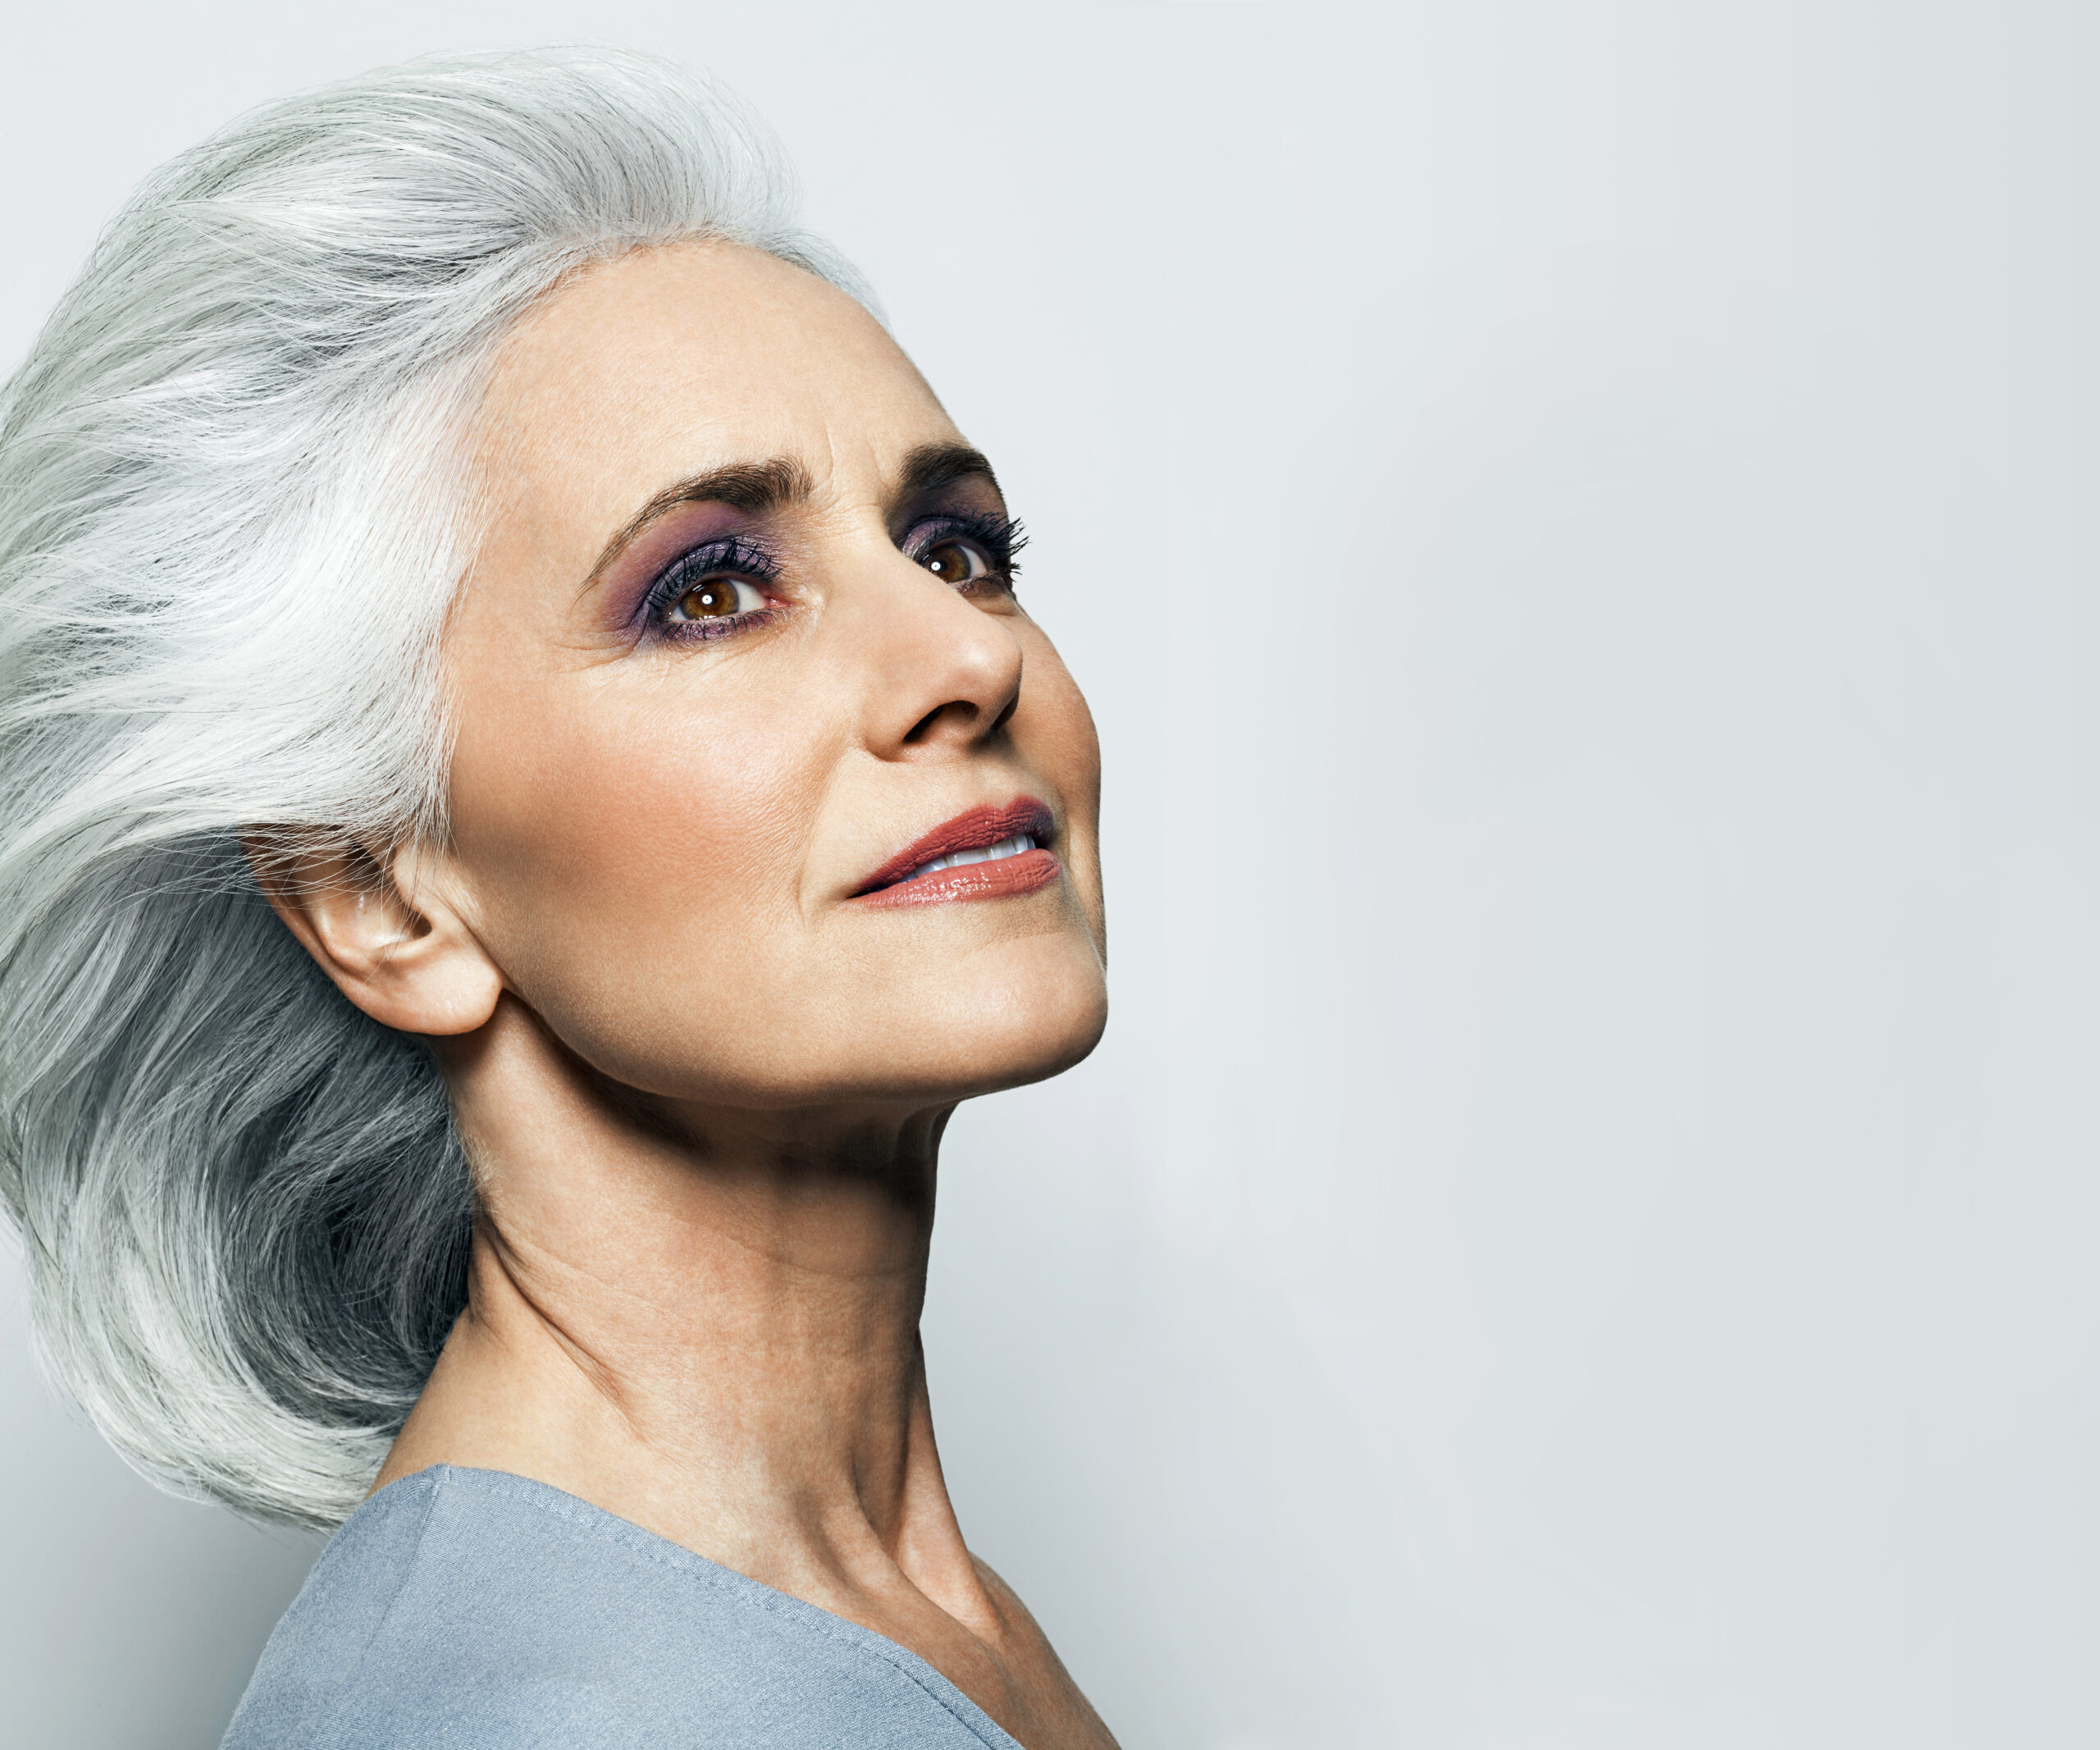 The future of anti-ageing